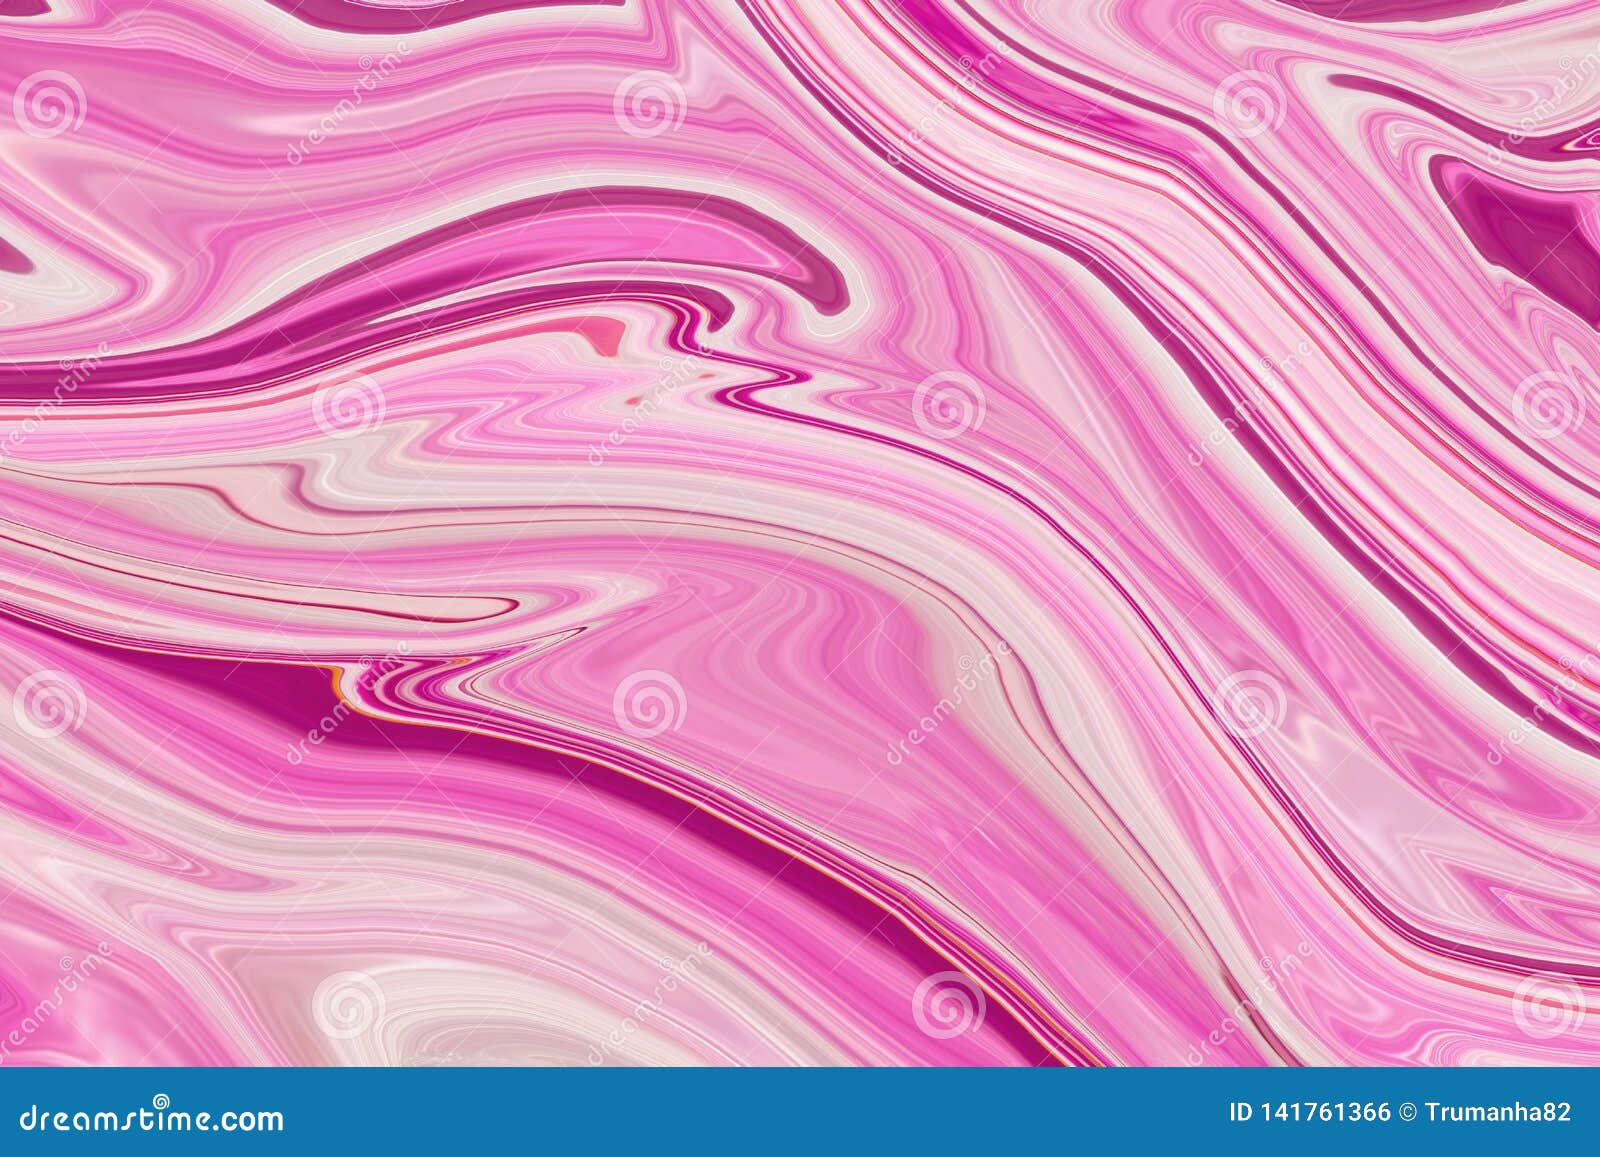 Abstract Pink and White Marble Texture for Background Stock Photo